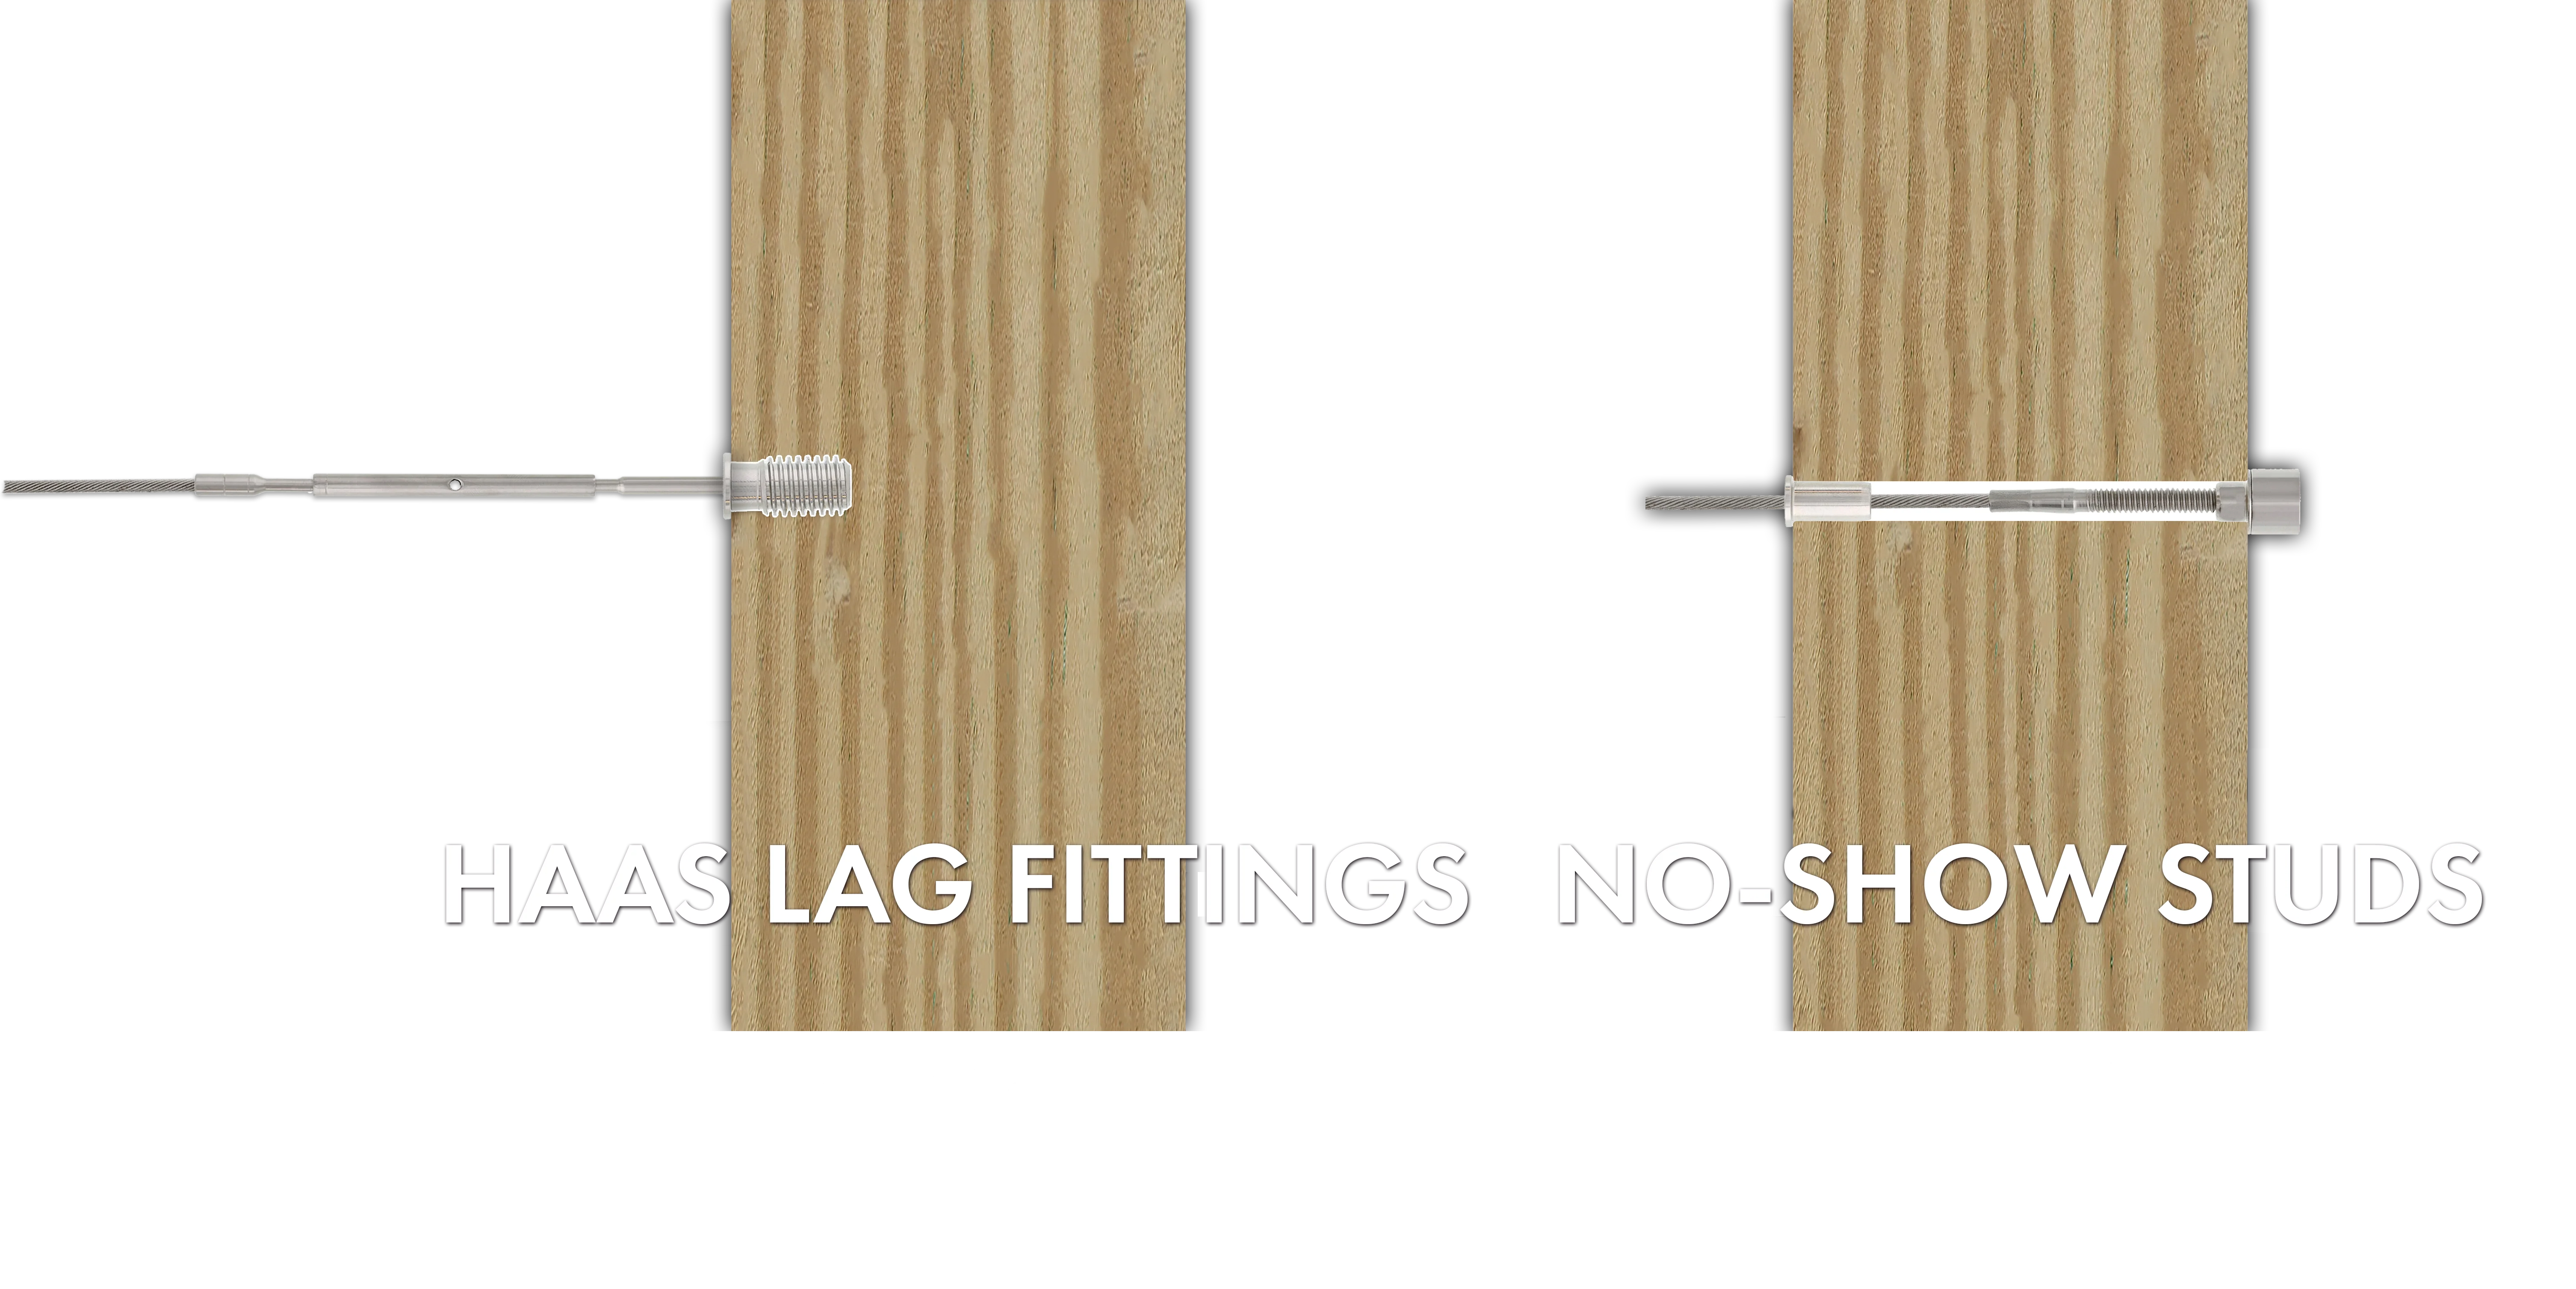 Fittings applications comparison graphic